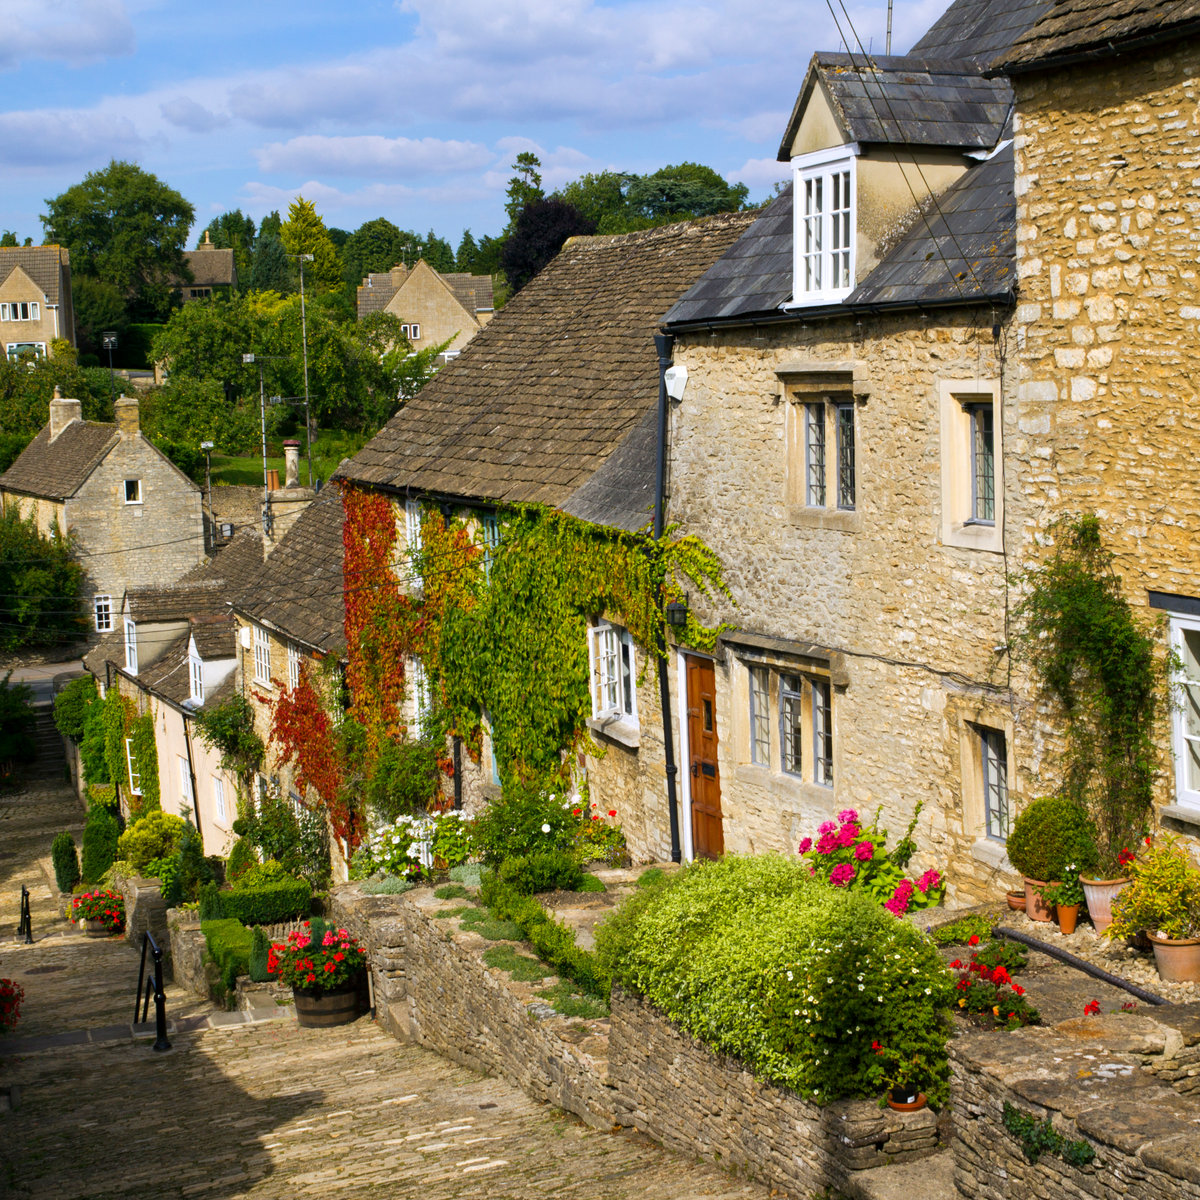 IMAGE: The Chipping Steps in Tetbury